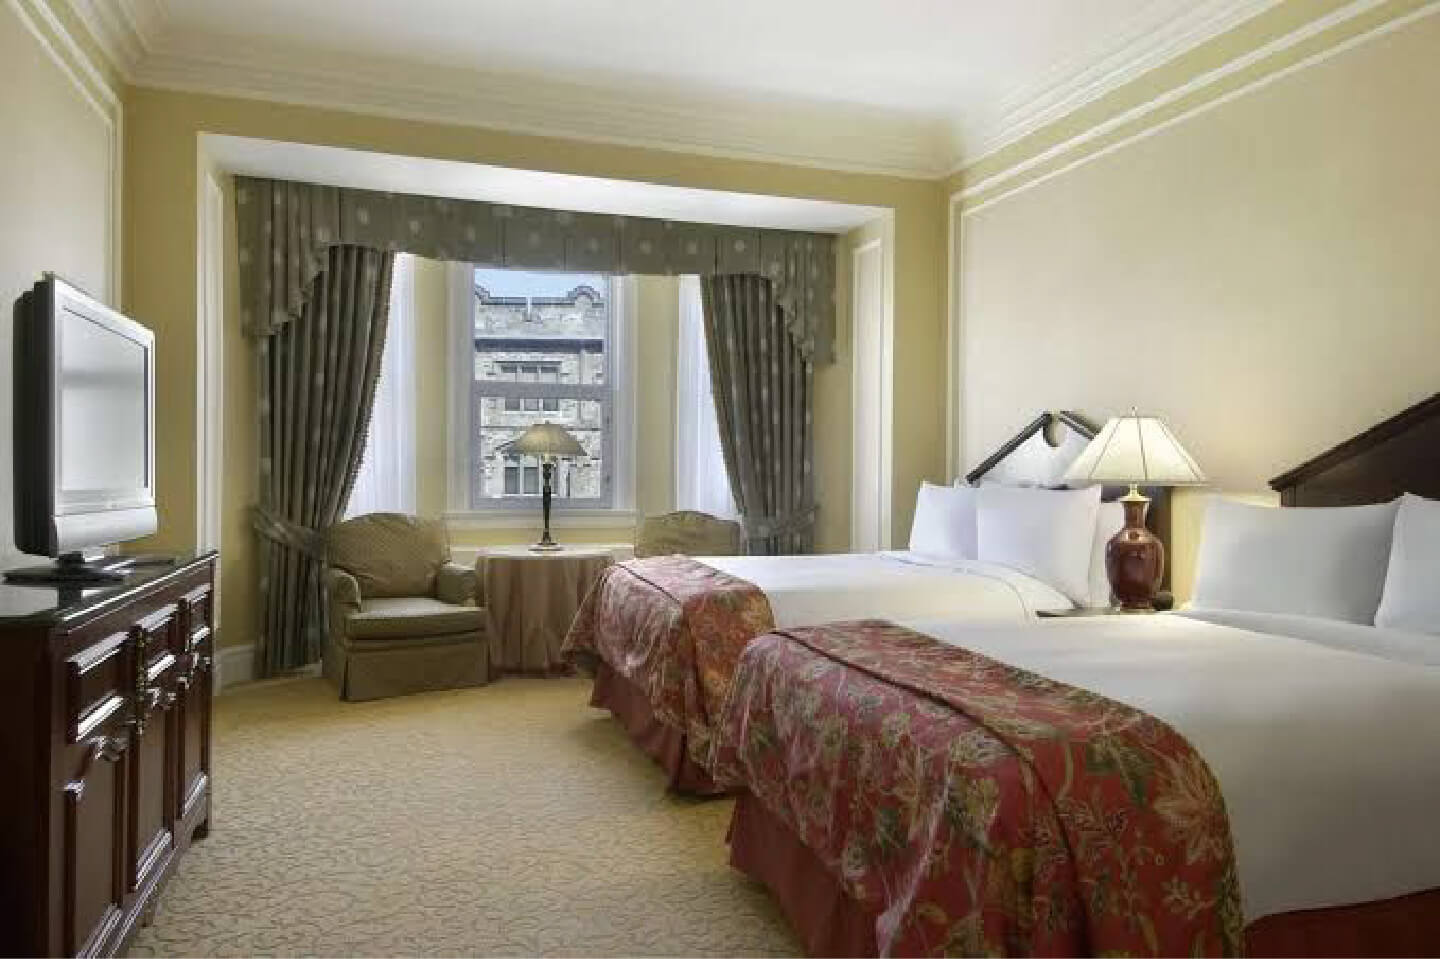 Example Room at the pet-friendly Fairmont Chateau Laurier